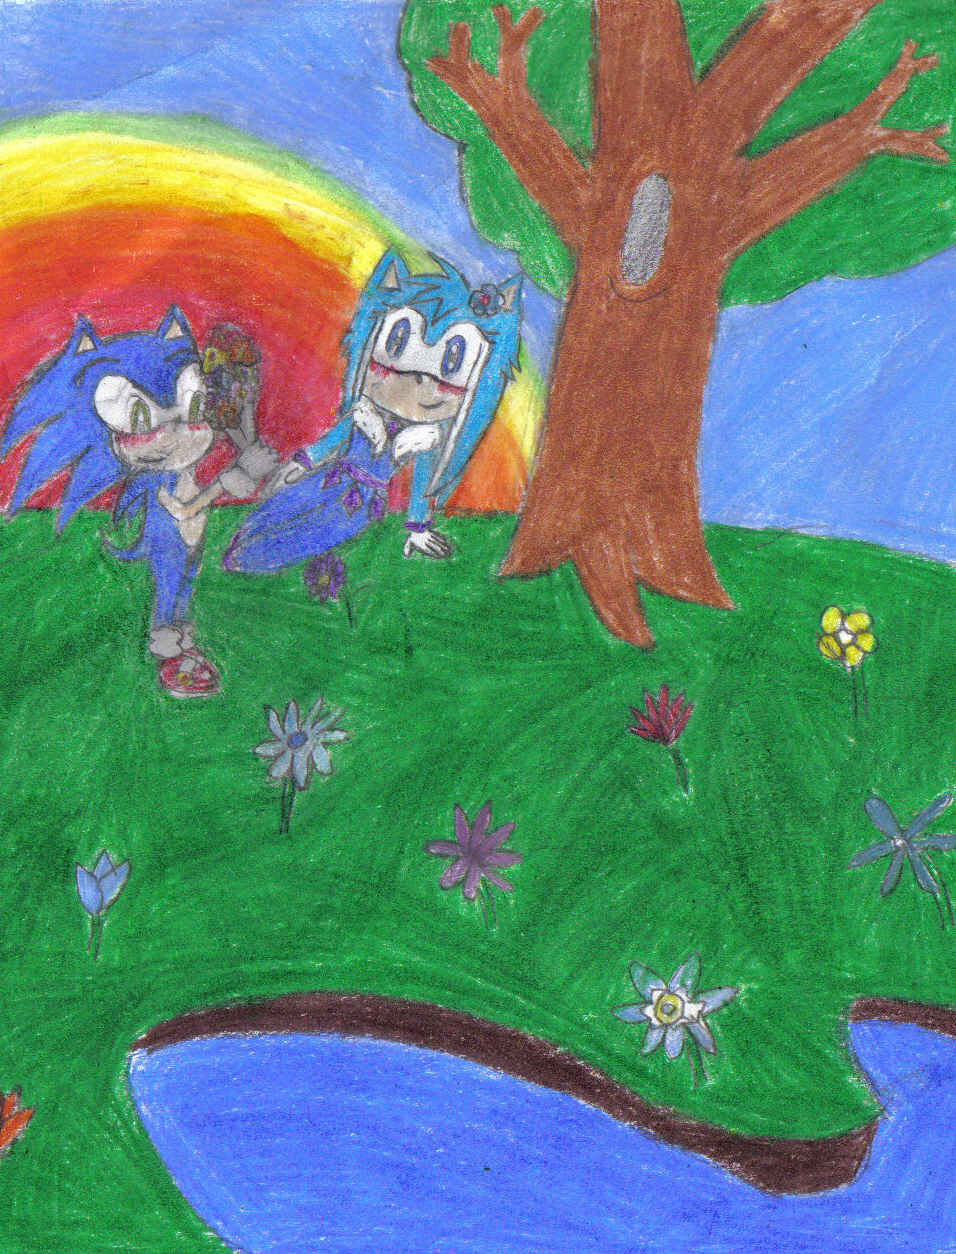 lilsoniclover's request Crystal and Sonic by lilshadowlover642